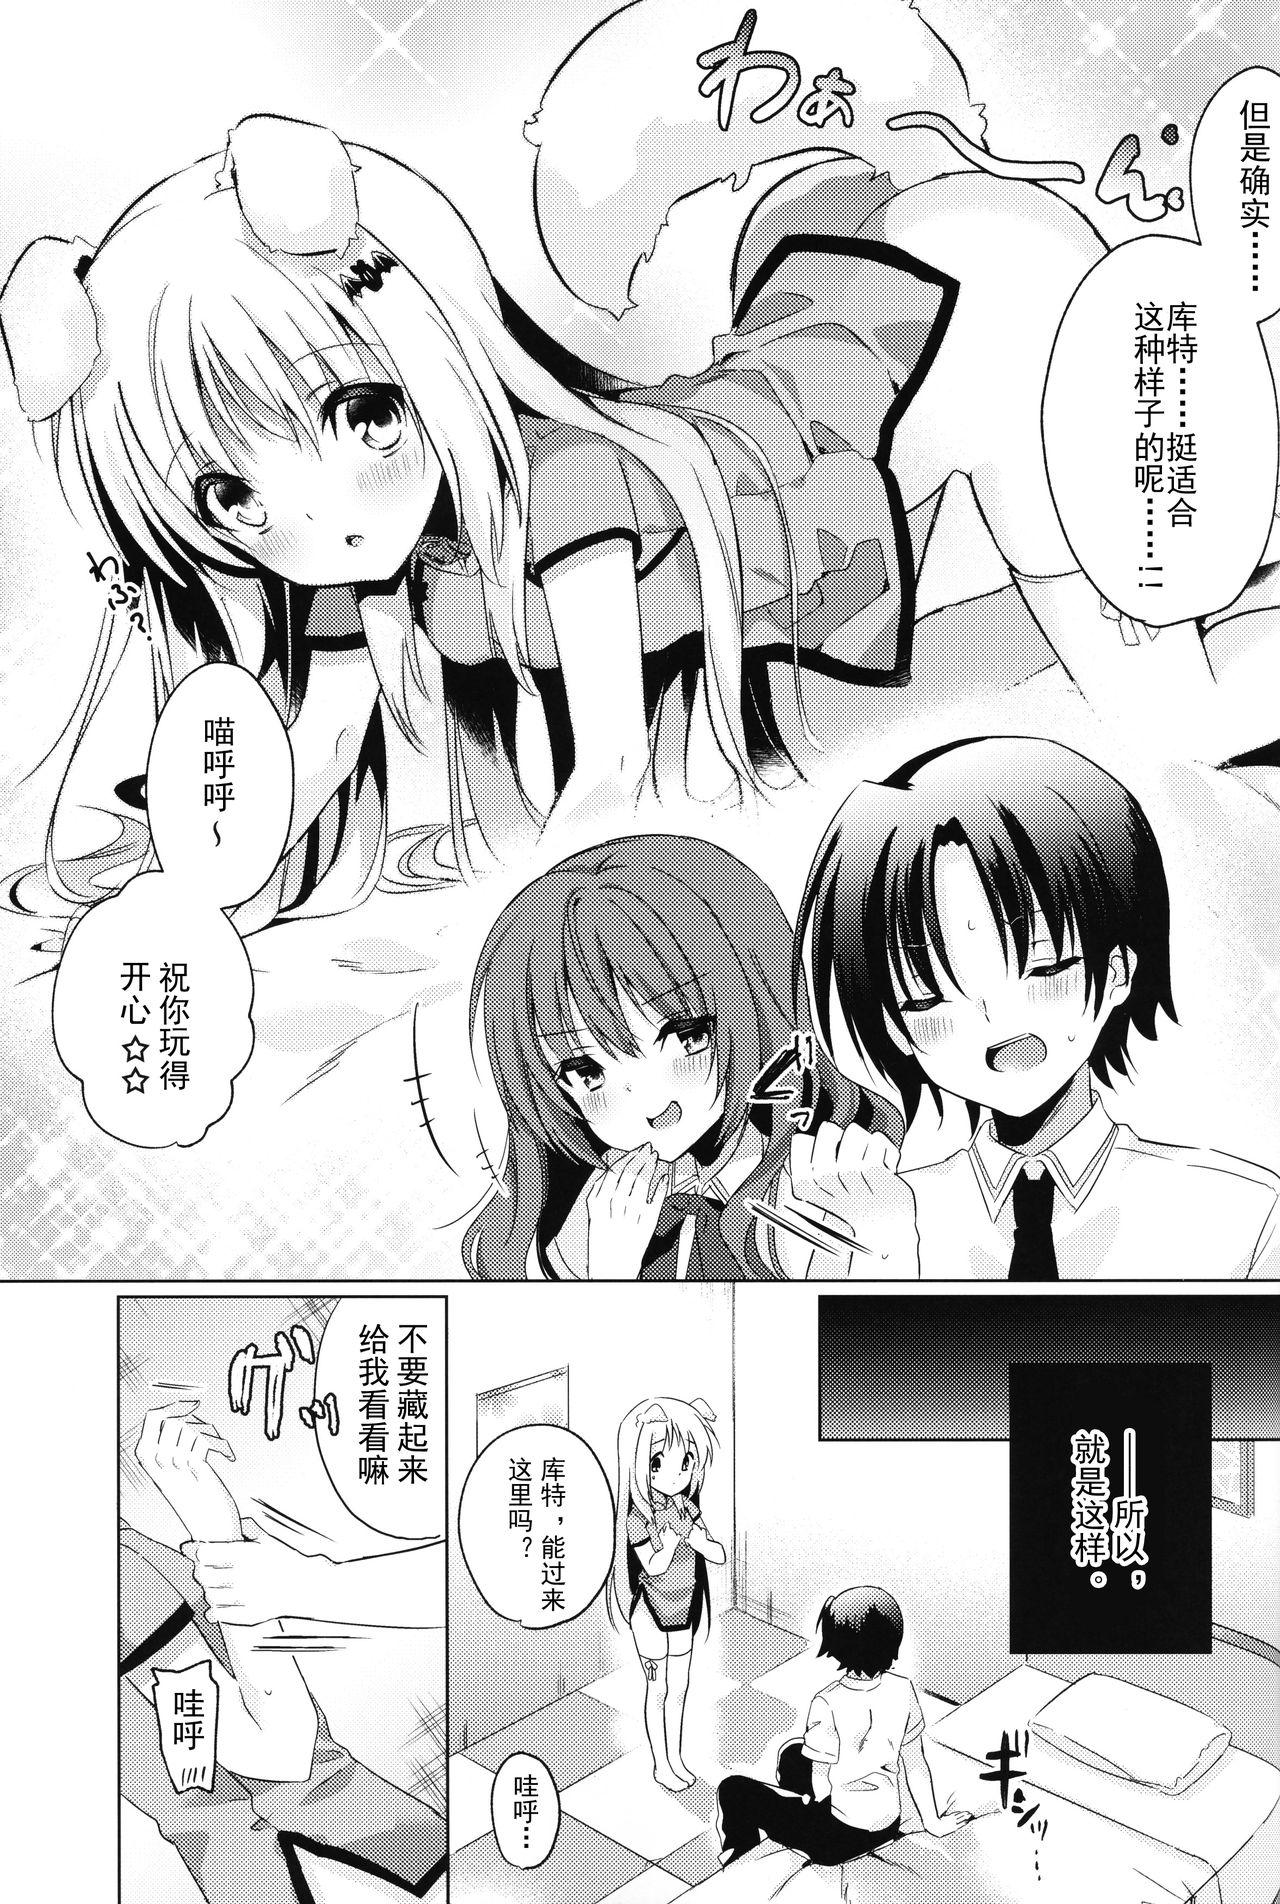 Indoor Kud After4 - Little busters Jocks - Page 7